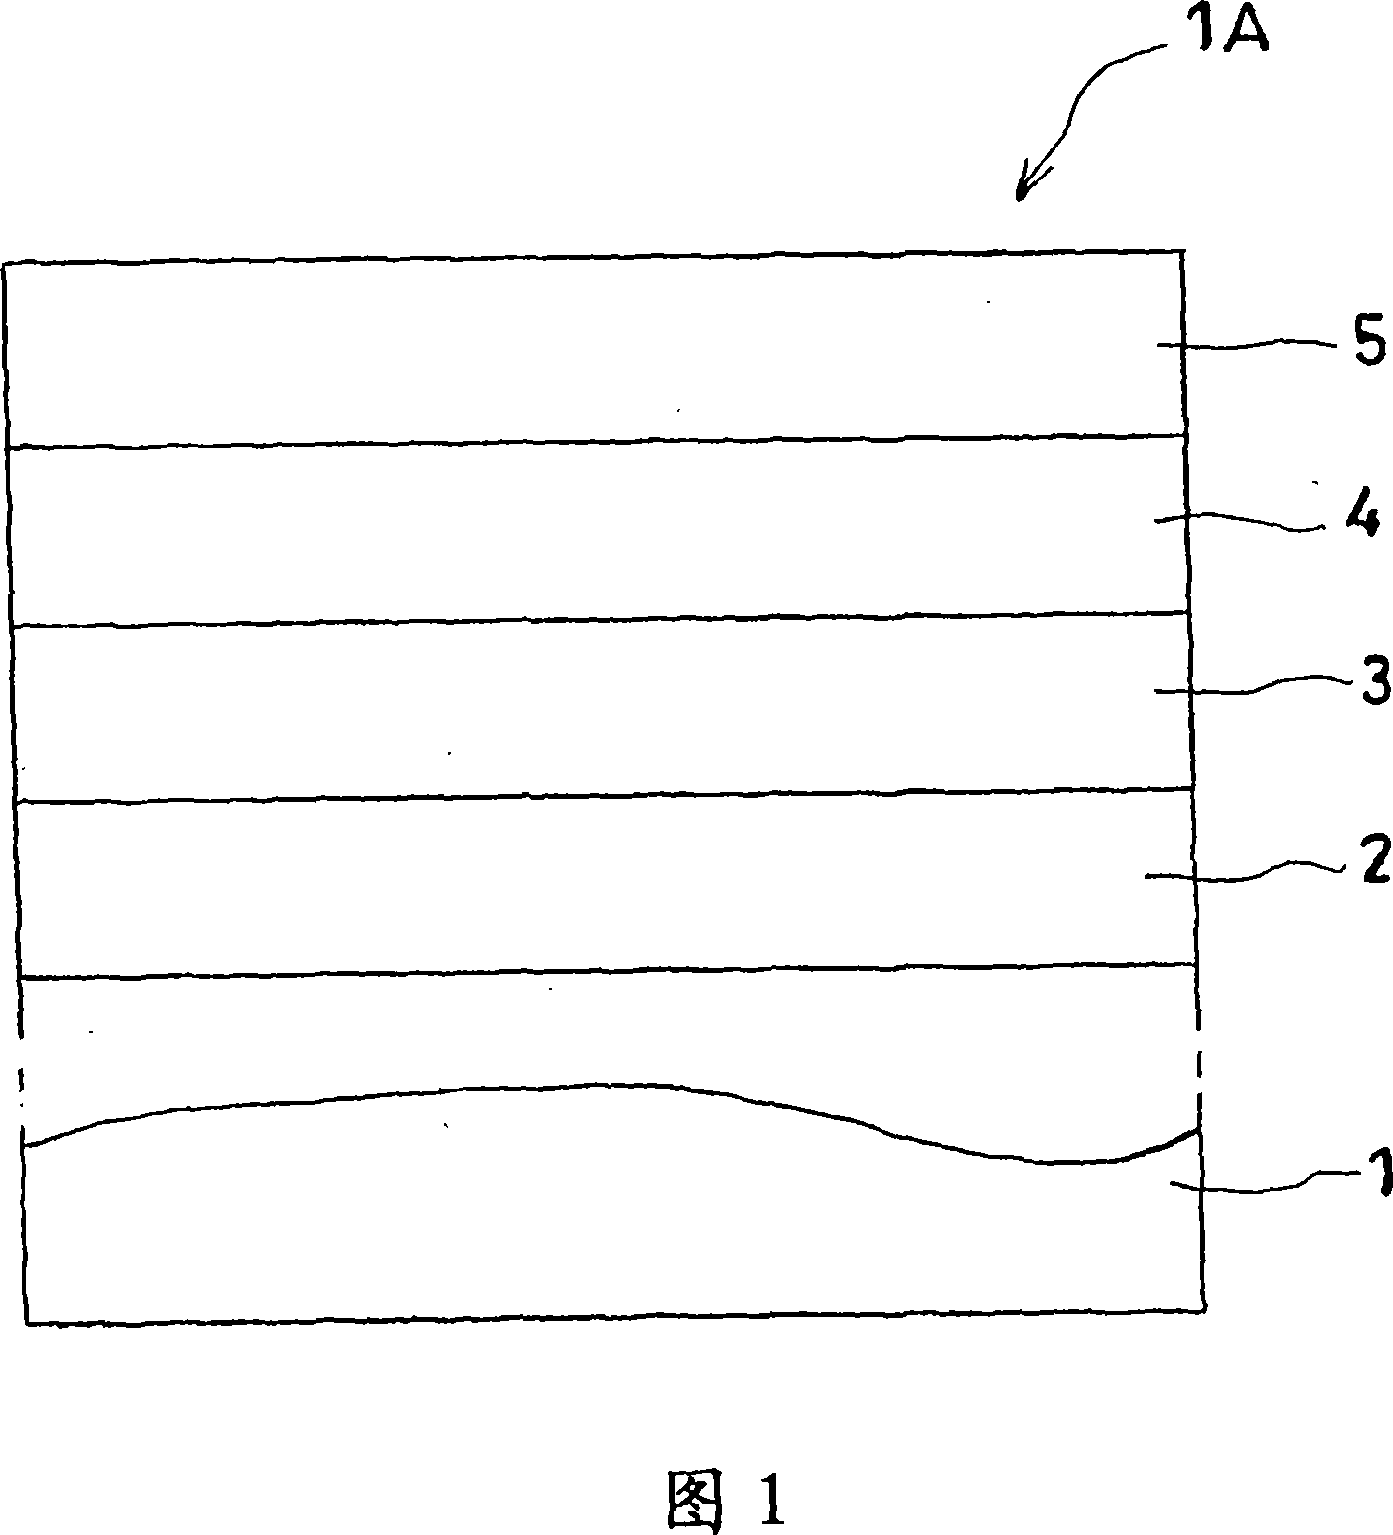 P-N junction-type compoud semiconductor light-emitting diode